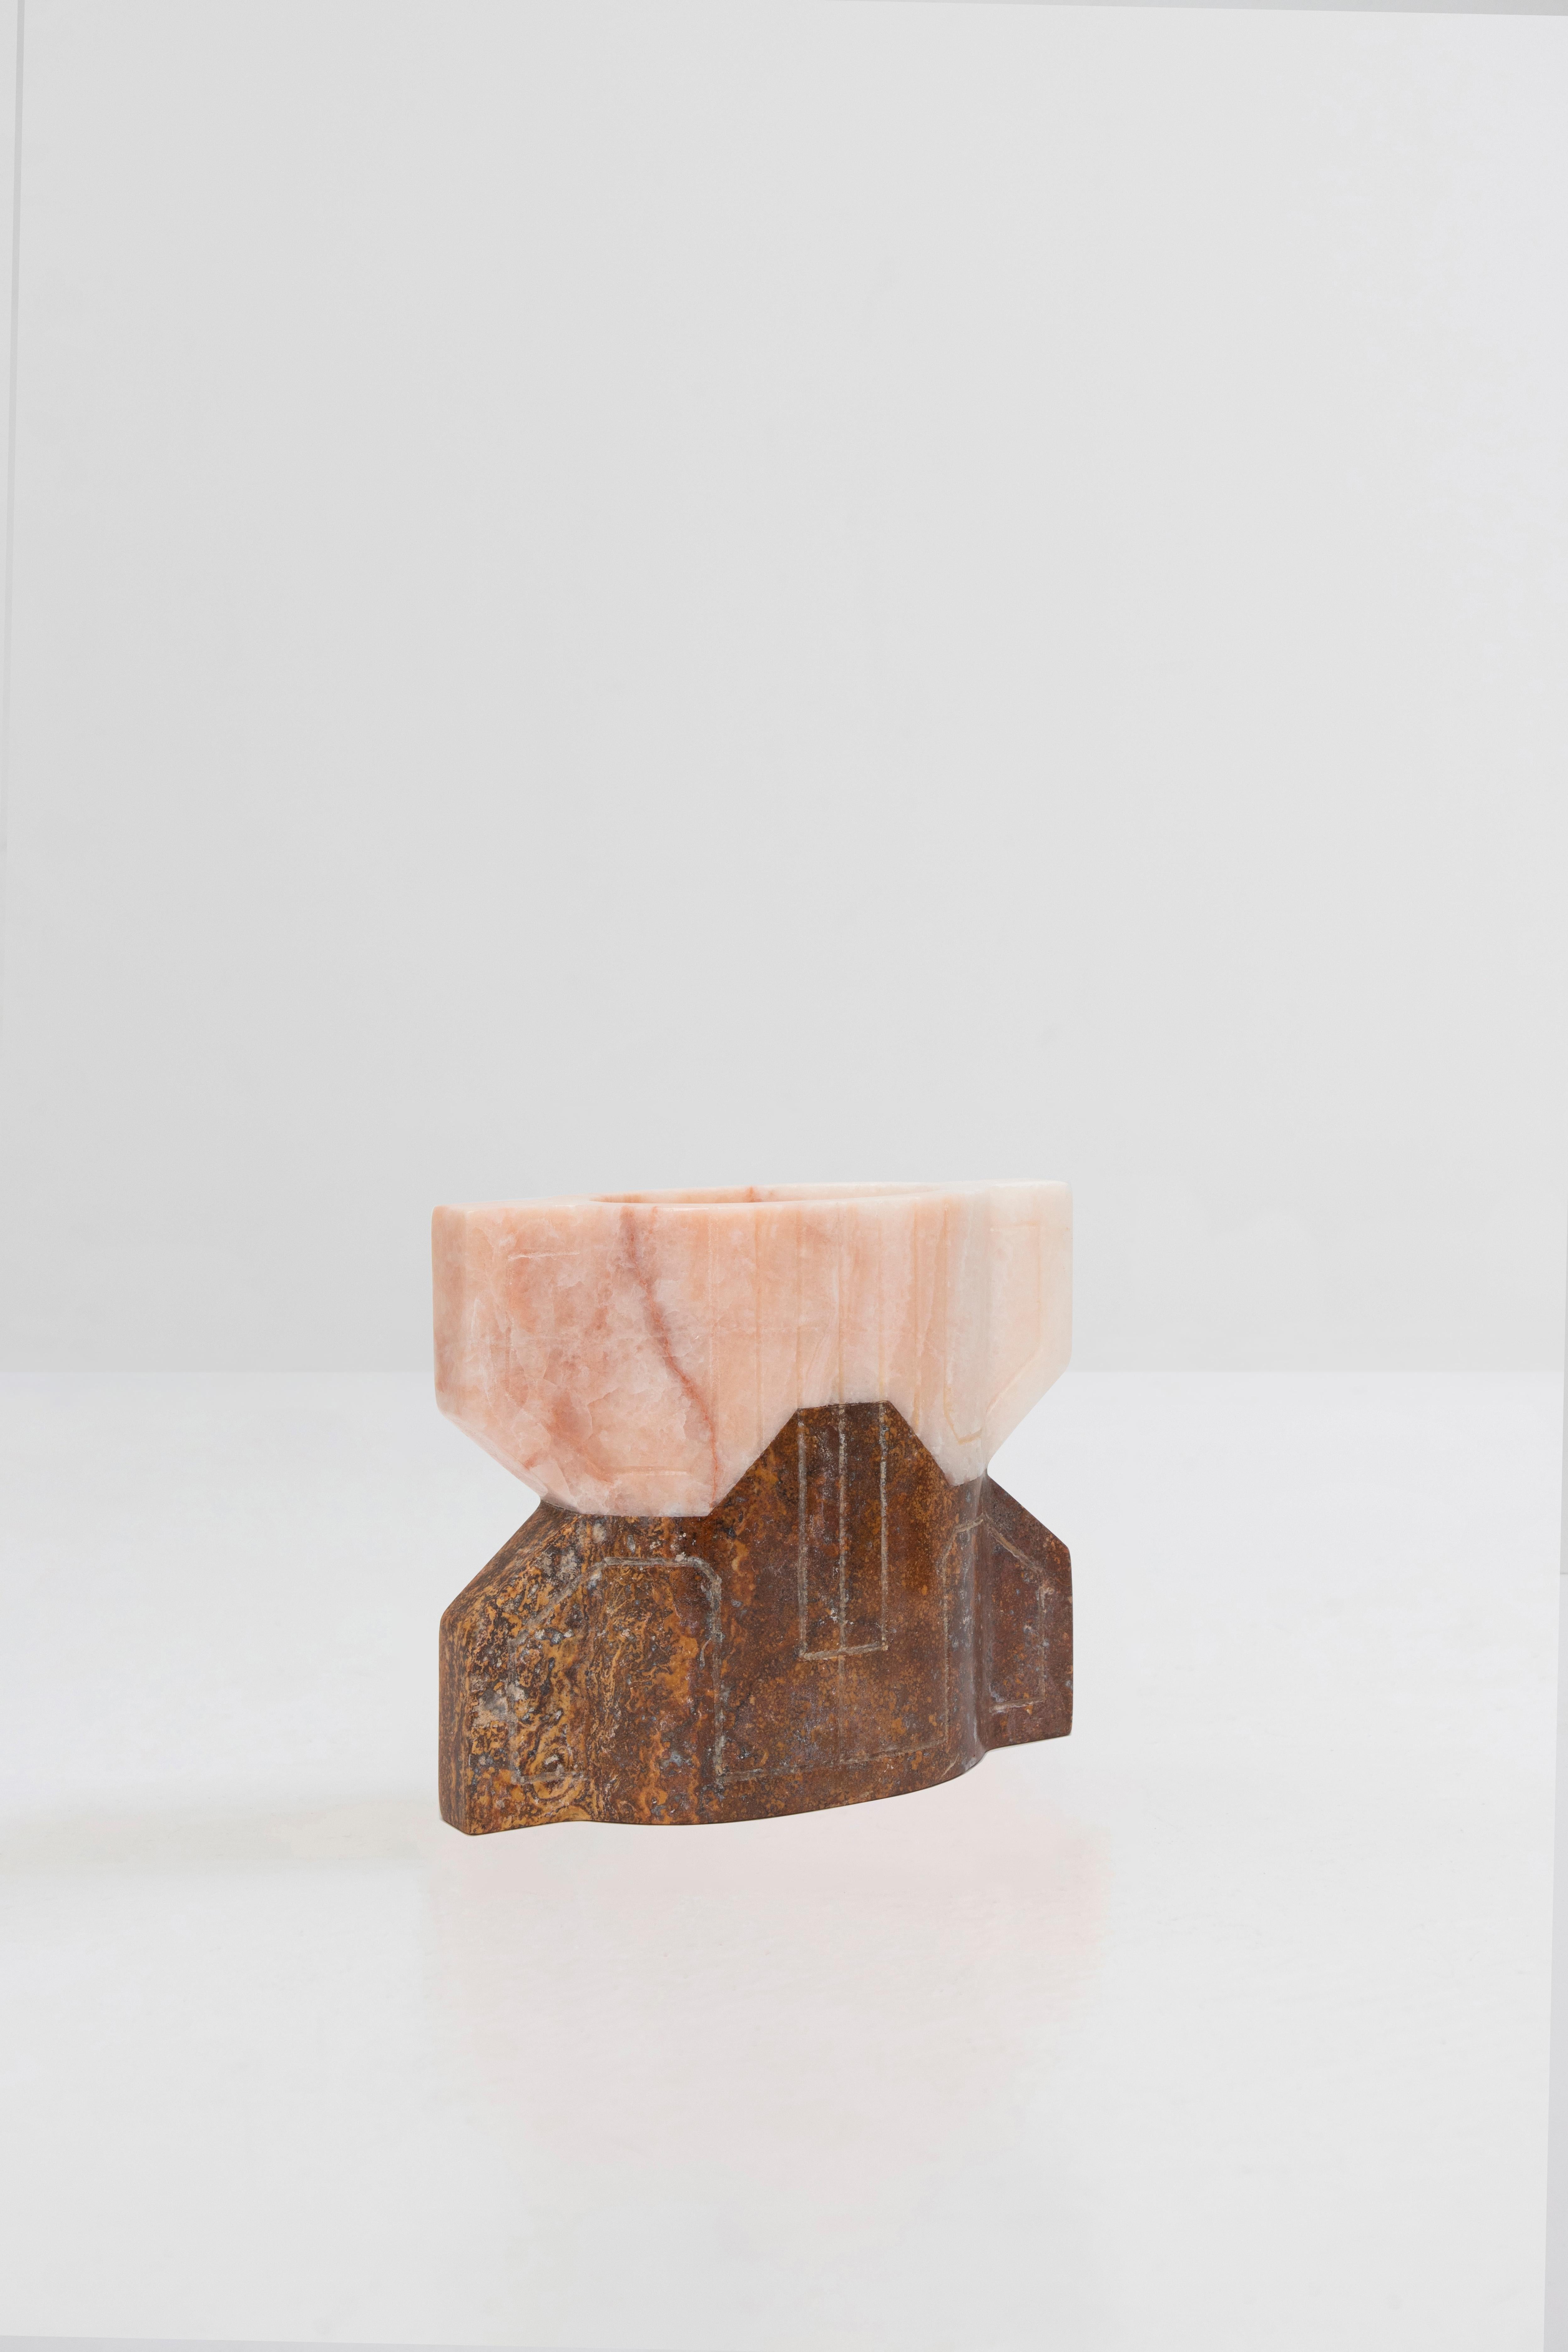 Pink onyx and red travertine
Edition of 10 + 2 AP

**As this work is made of natural stone, color and veins may vary from the photo**
Handcrafted in Mexico

The inspiration for these pieces draws deeply from the ancient and characteristic